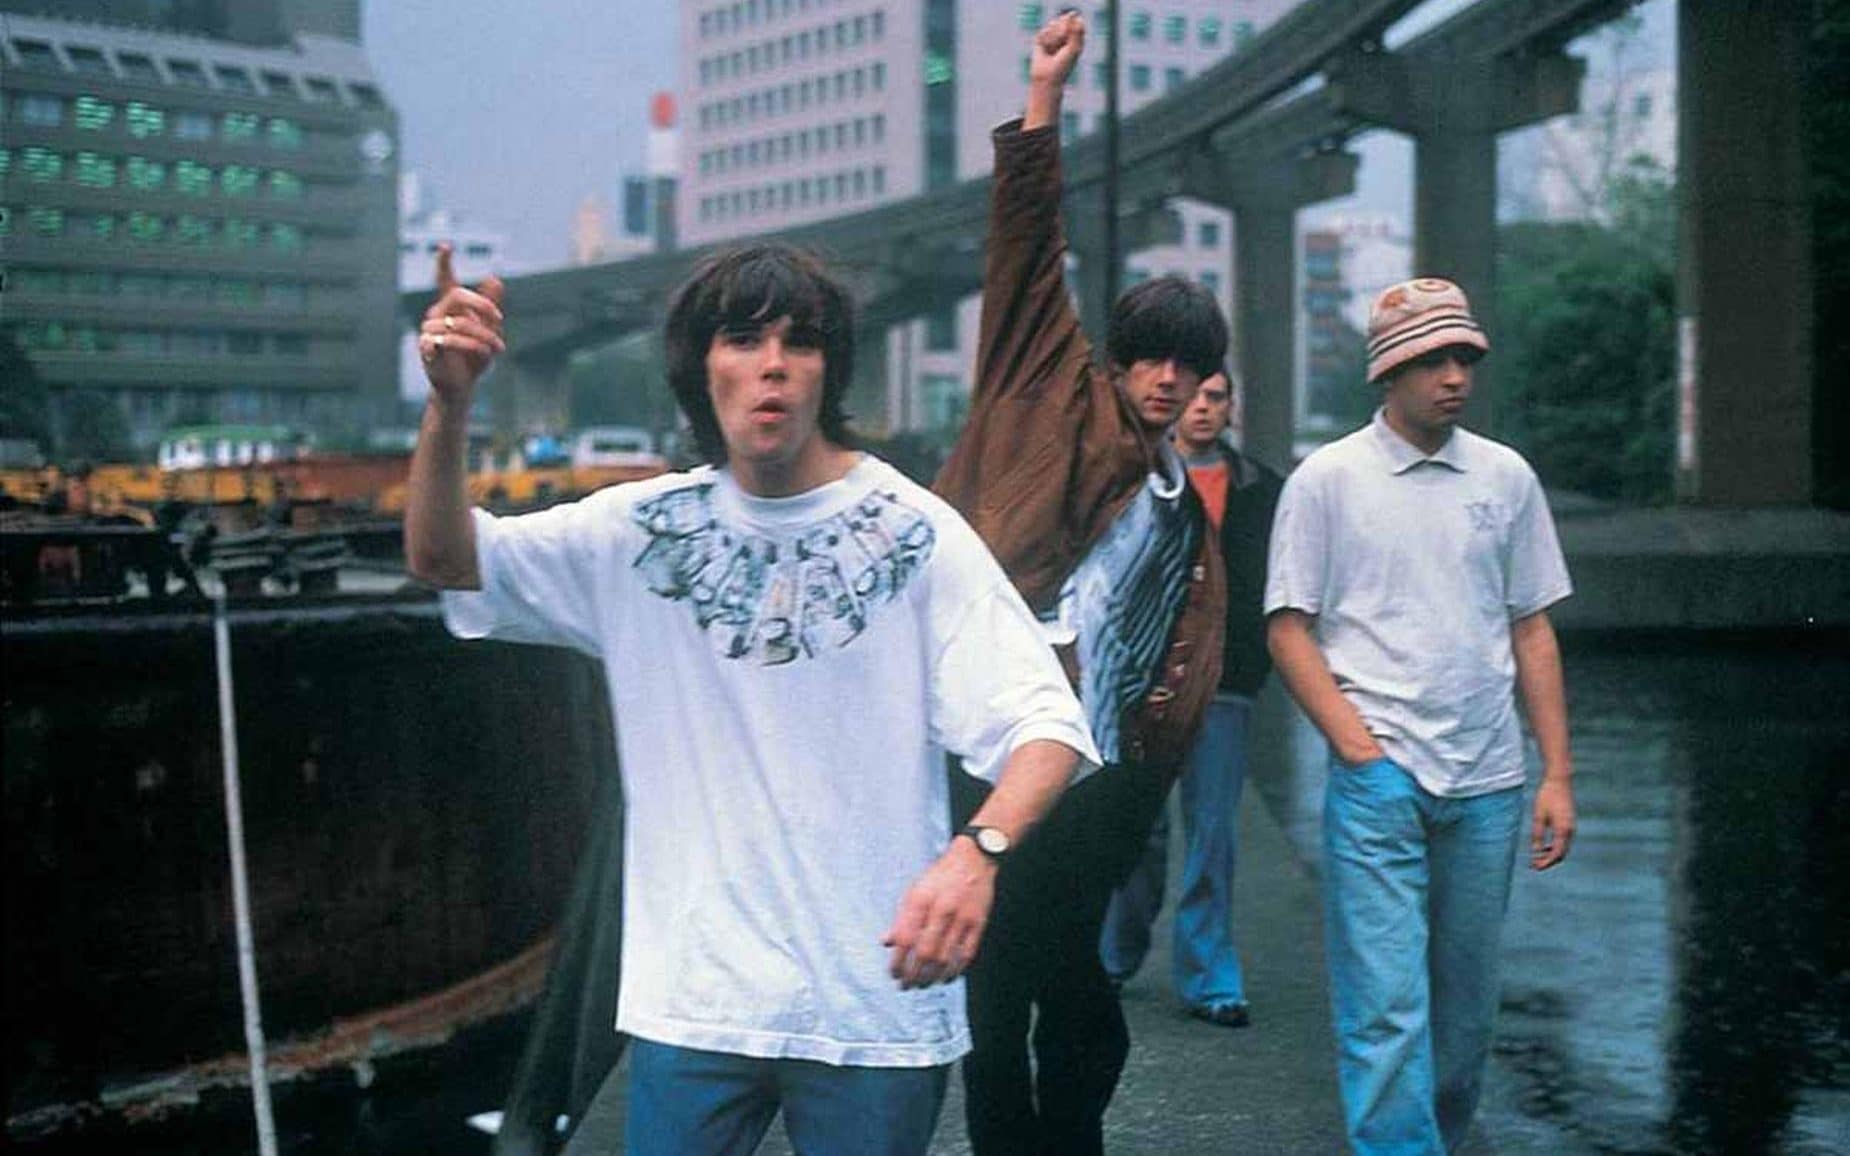 Happy birthday to Ian George Brown, born on this day in 1963 in Warrington, England. Long live the Stone Roses! 